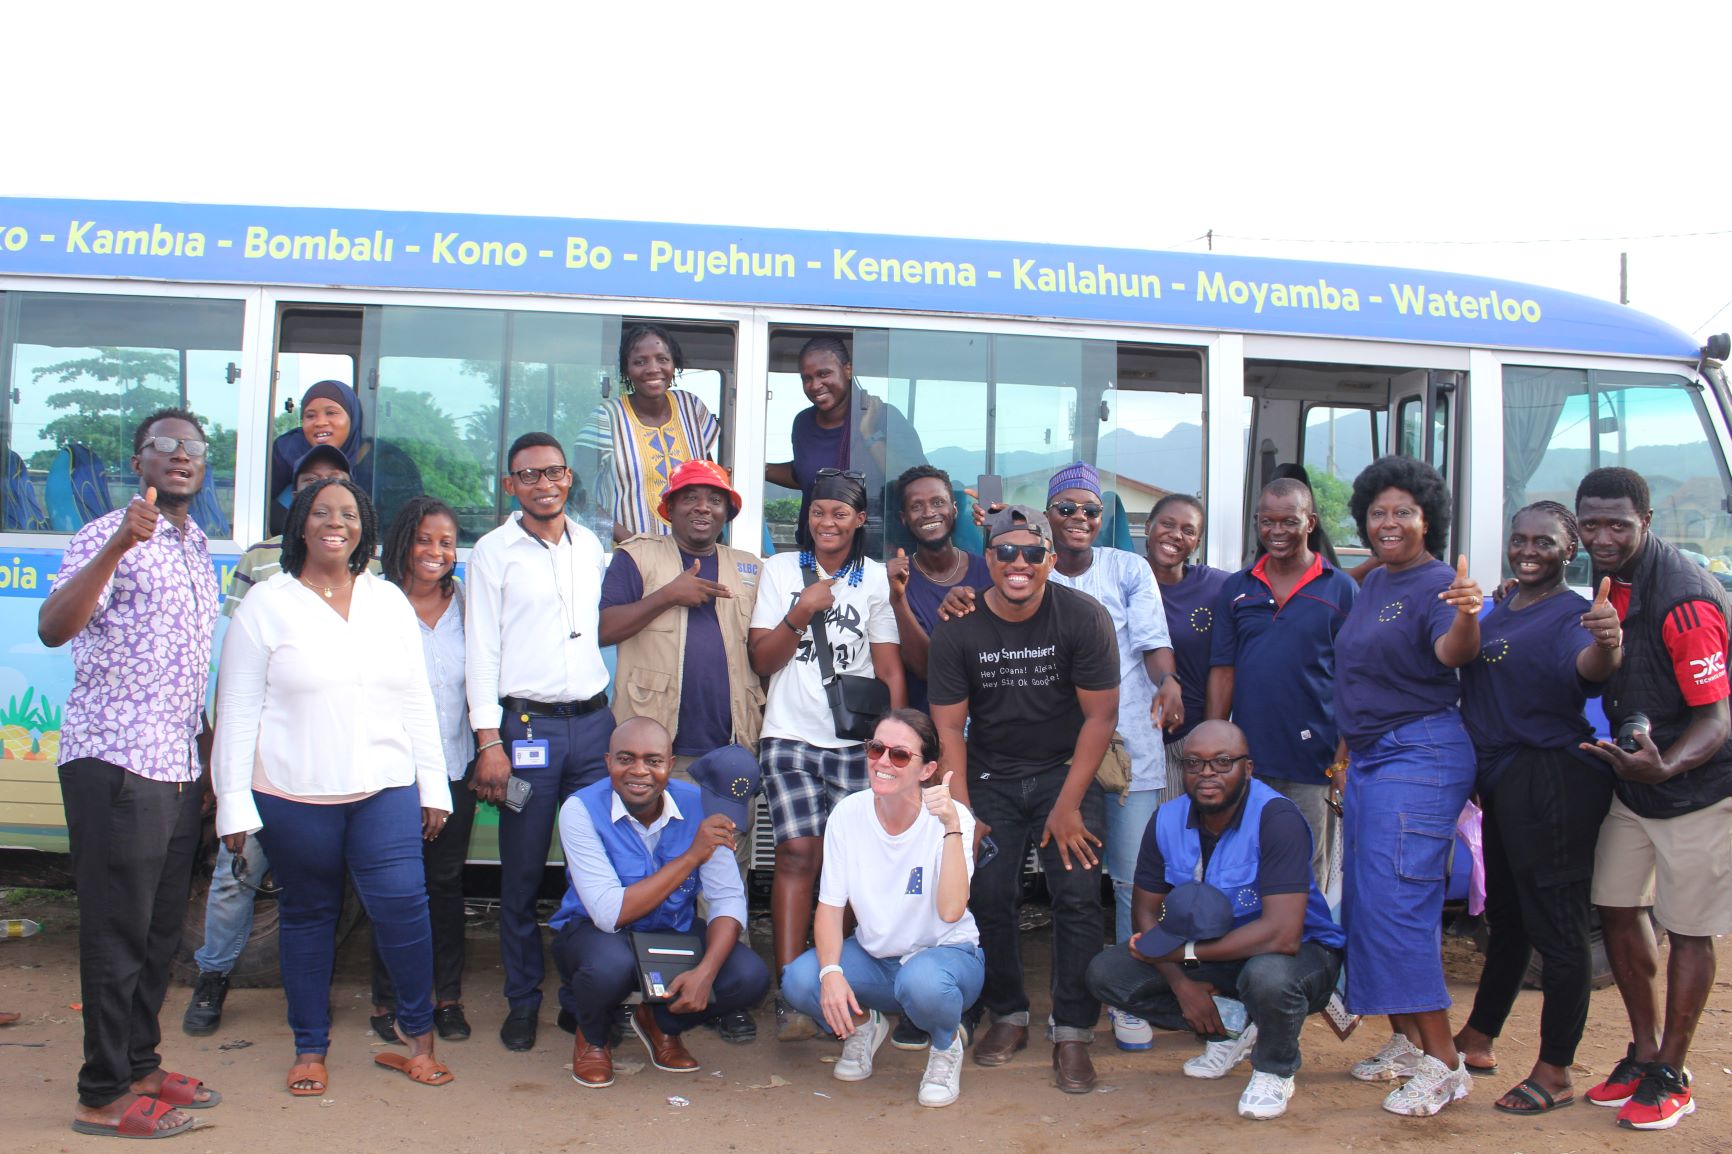 EU-Sierra Leone Concludes Nationwide Bus Tour, Showcasing Strong Cooperation With Sierra Leone